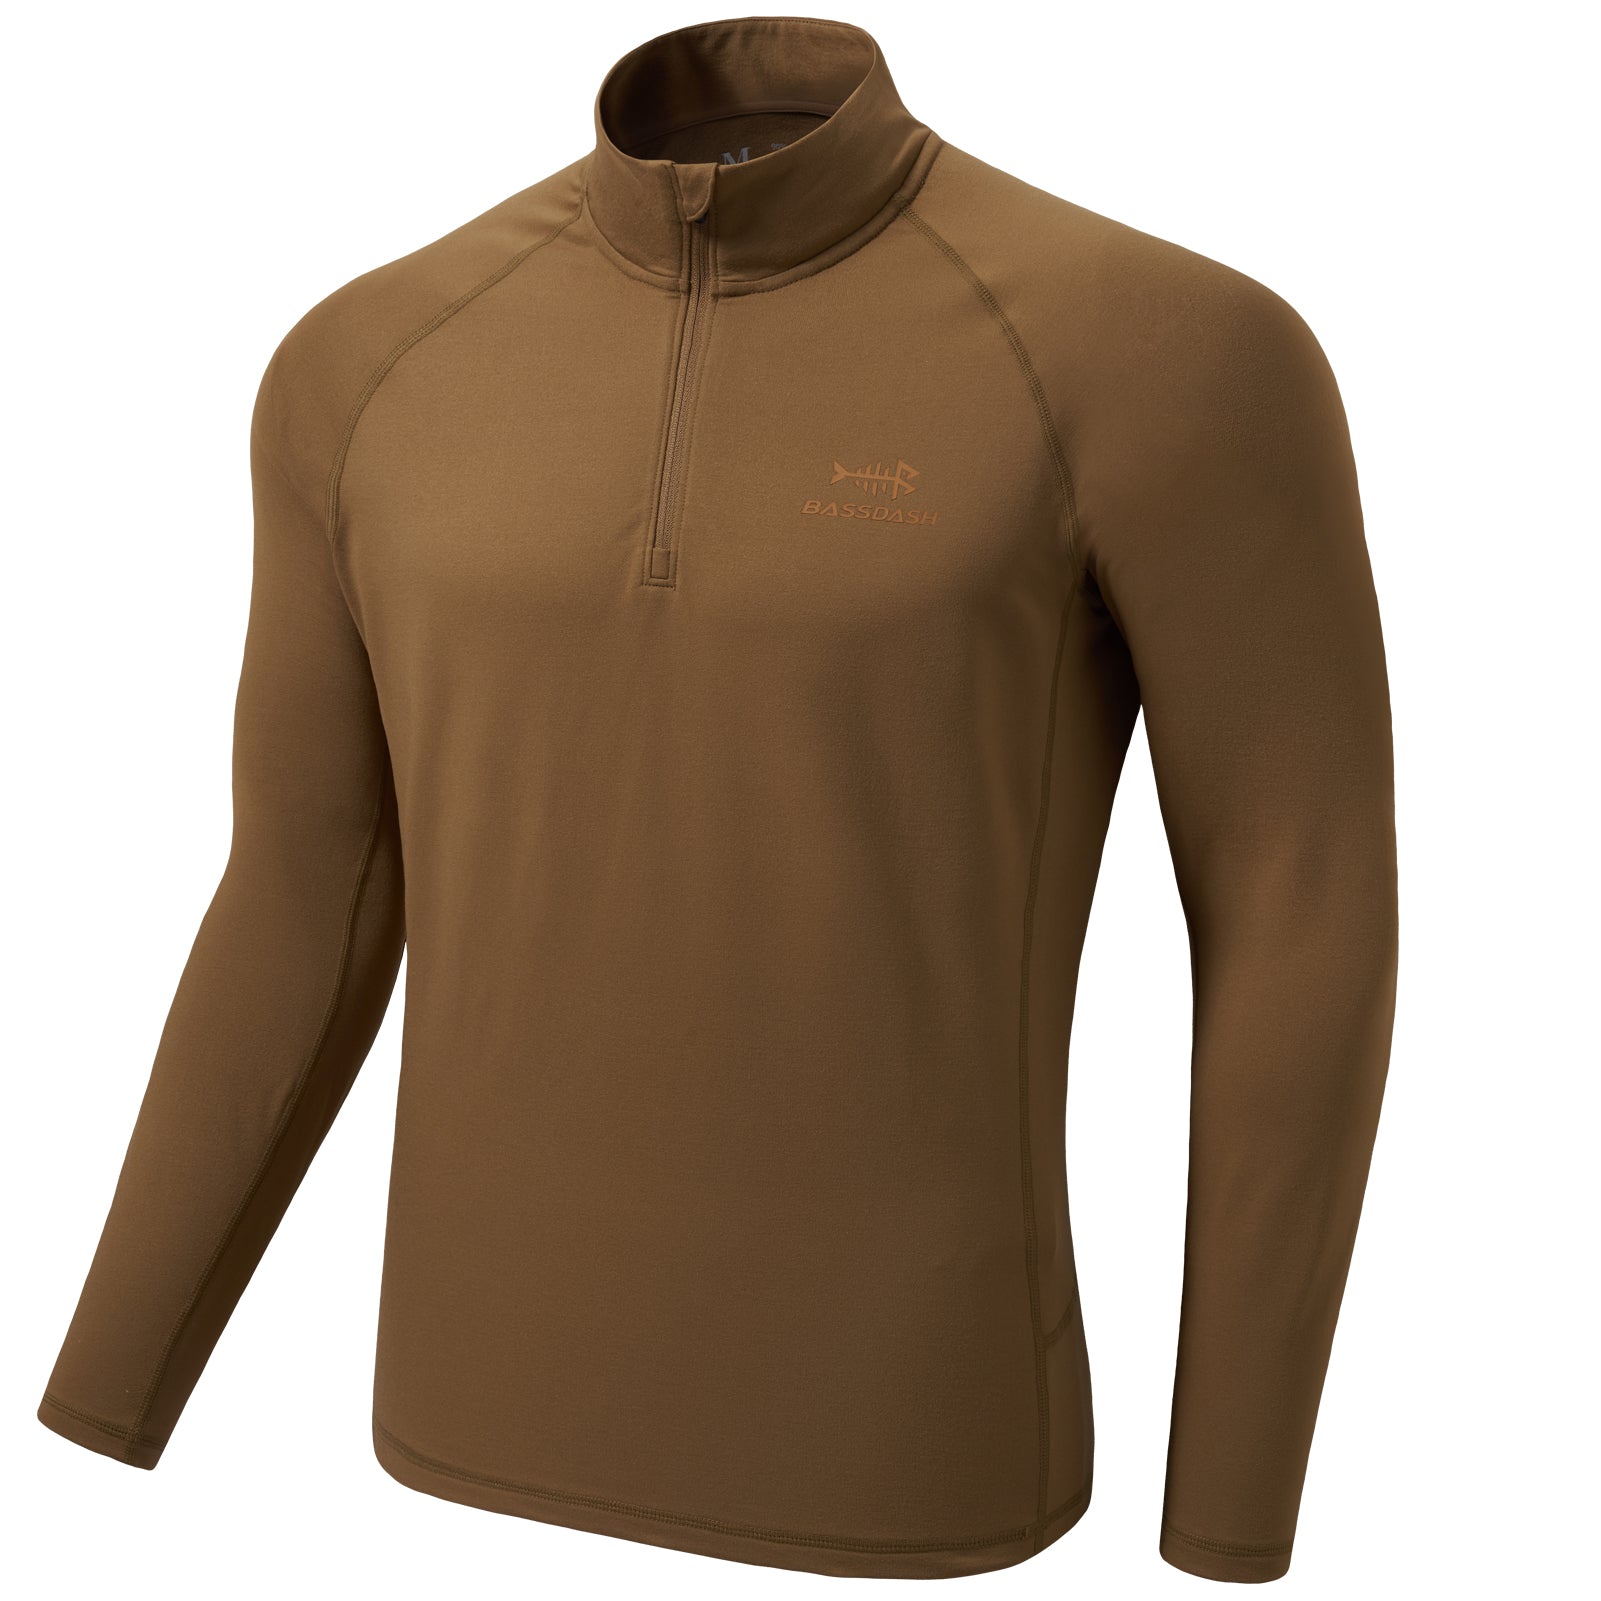 Men's Midweight Thermal Base Layer Shirt 1/4 Zip Pullover FS20M